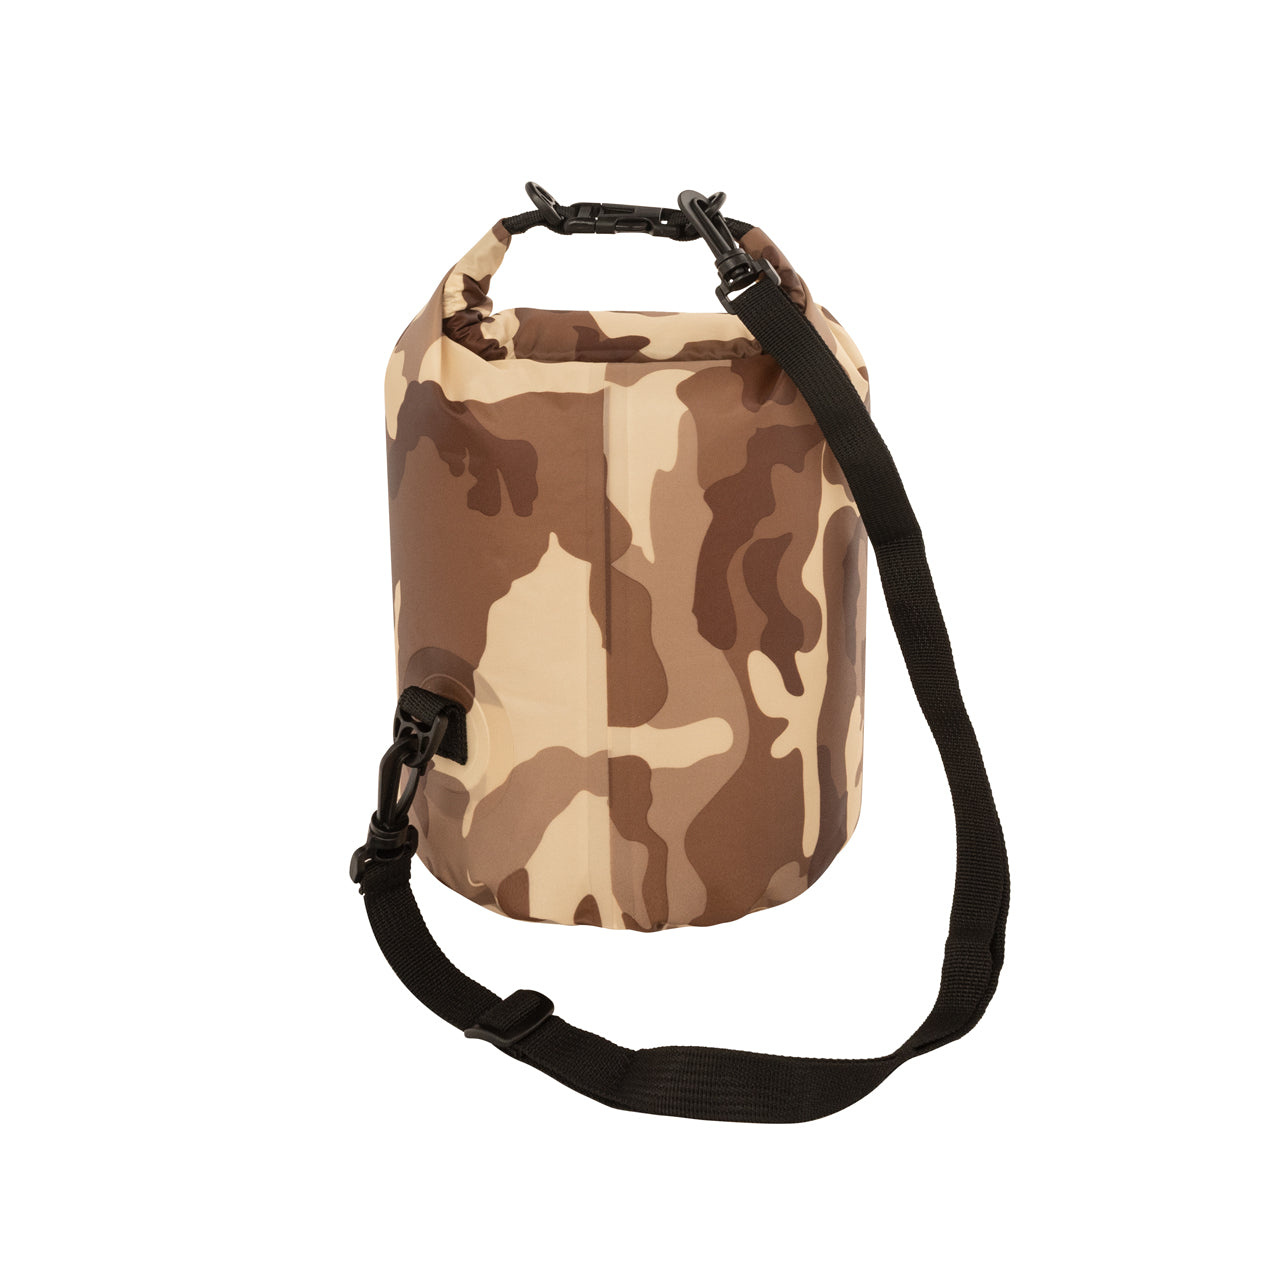 TrailGear 5 liter Heavy-Duty Camouflaged Dry Bag in the brown camo variation.